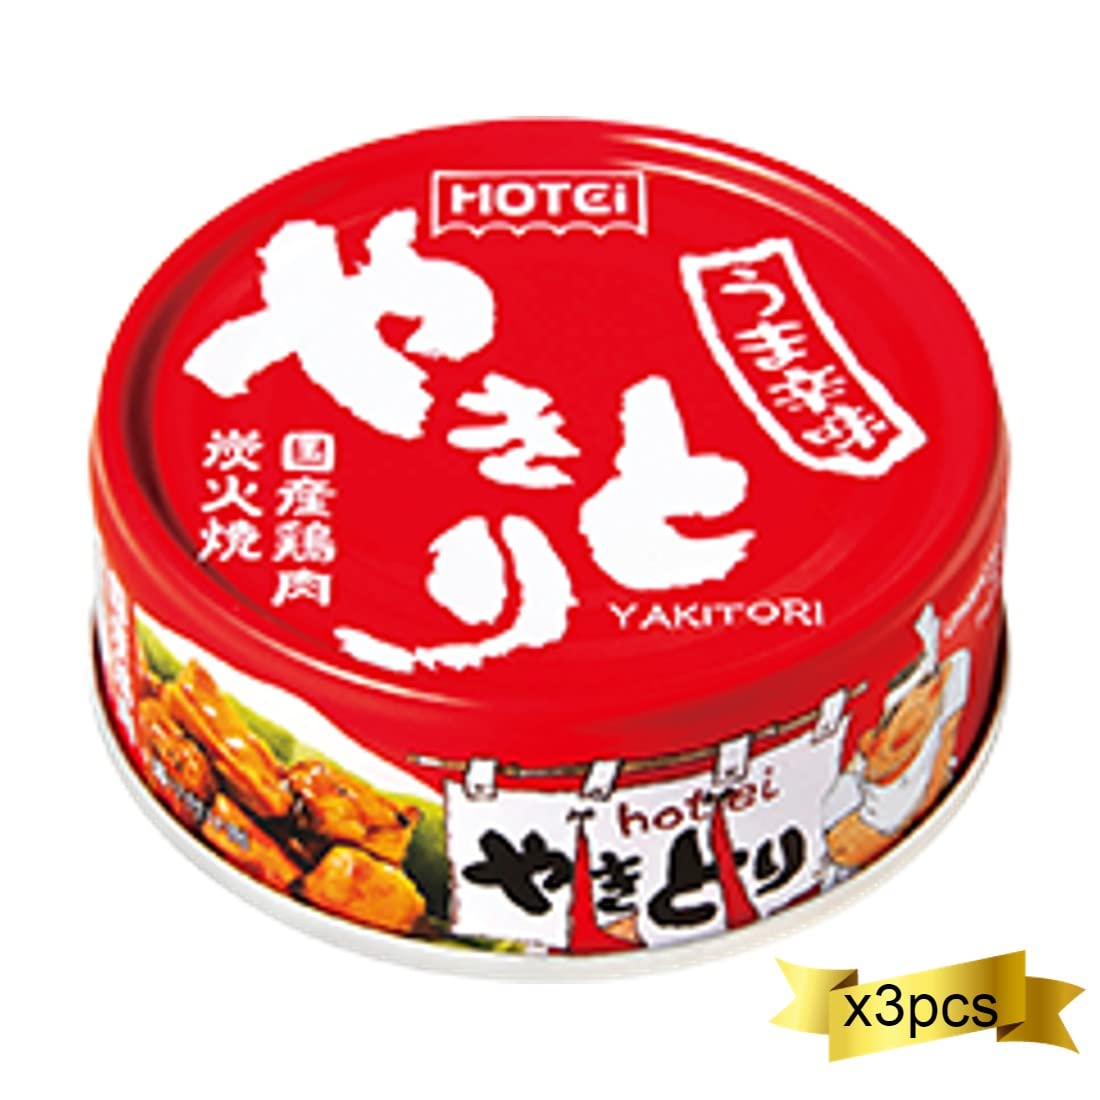 "Yakitori" (Chicken Side Dish) Delicious Spicy 2.6oz 3pcs Japanese Canned Food Hotei Foods Ninjapo